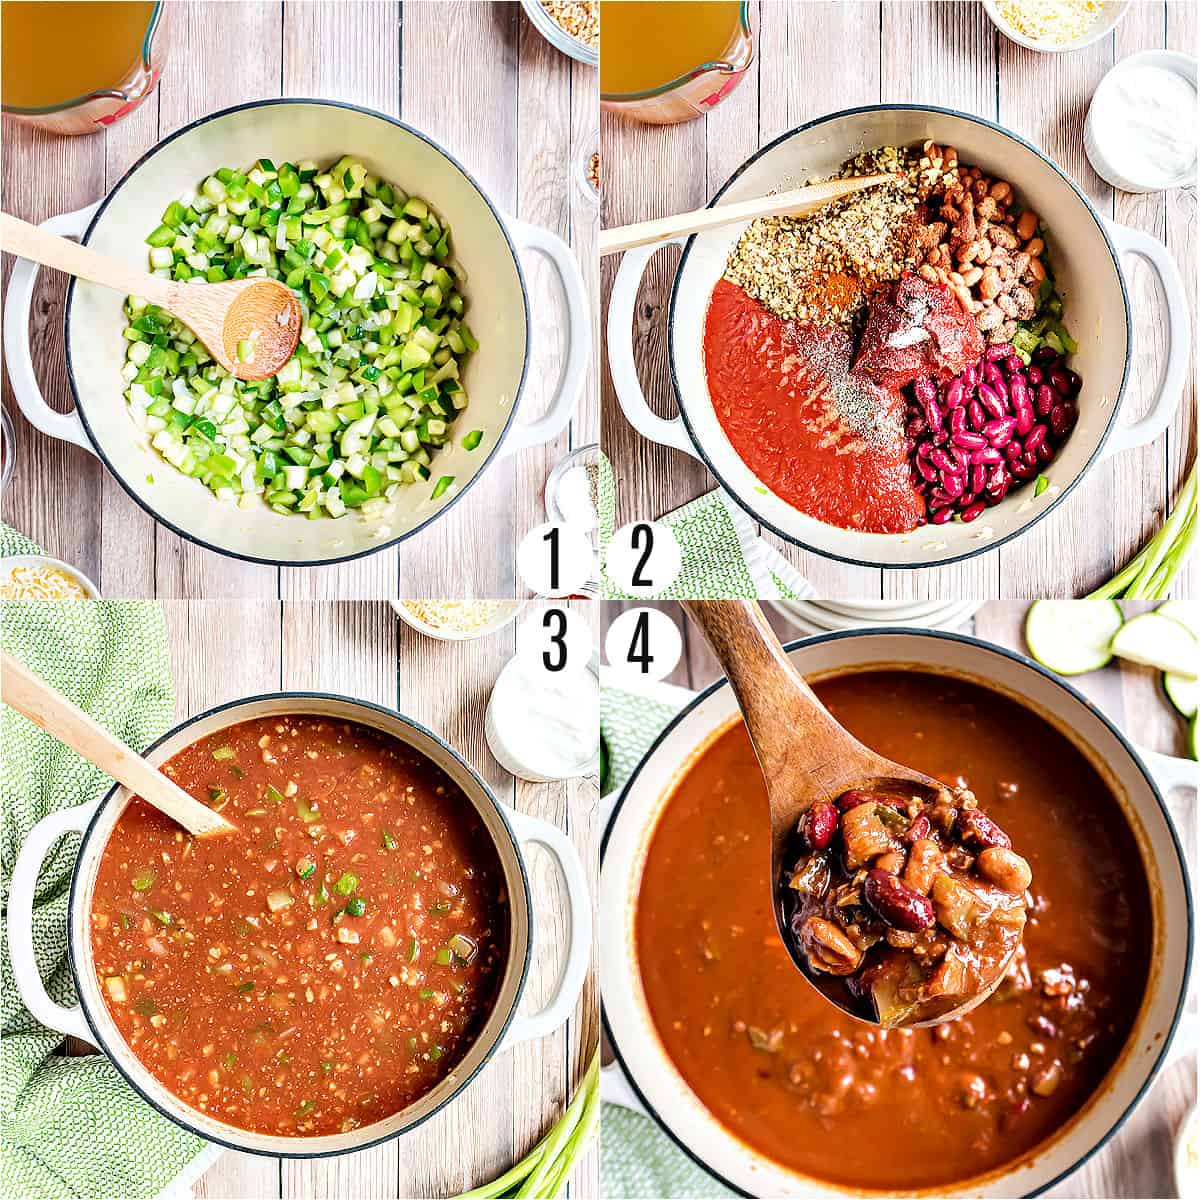 Step by step photos showing how to make meatless chili.